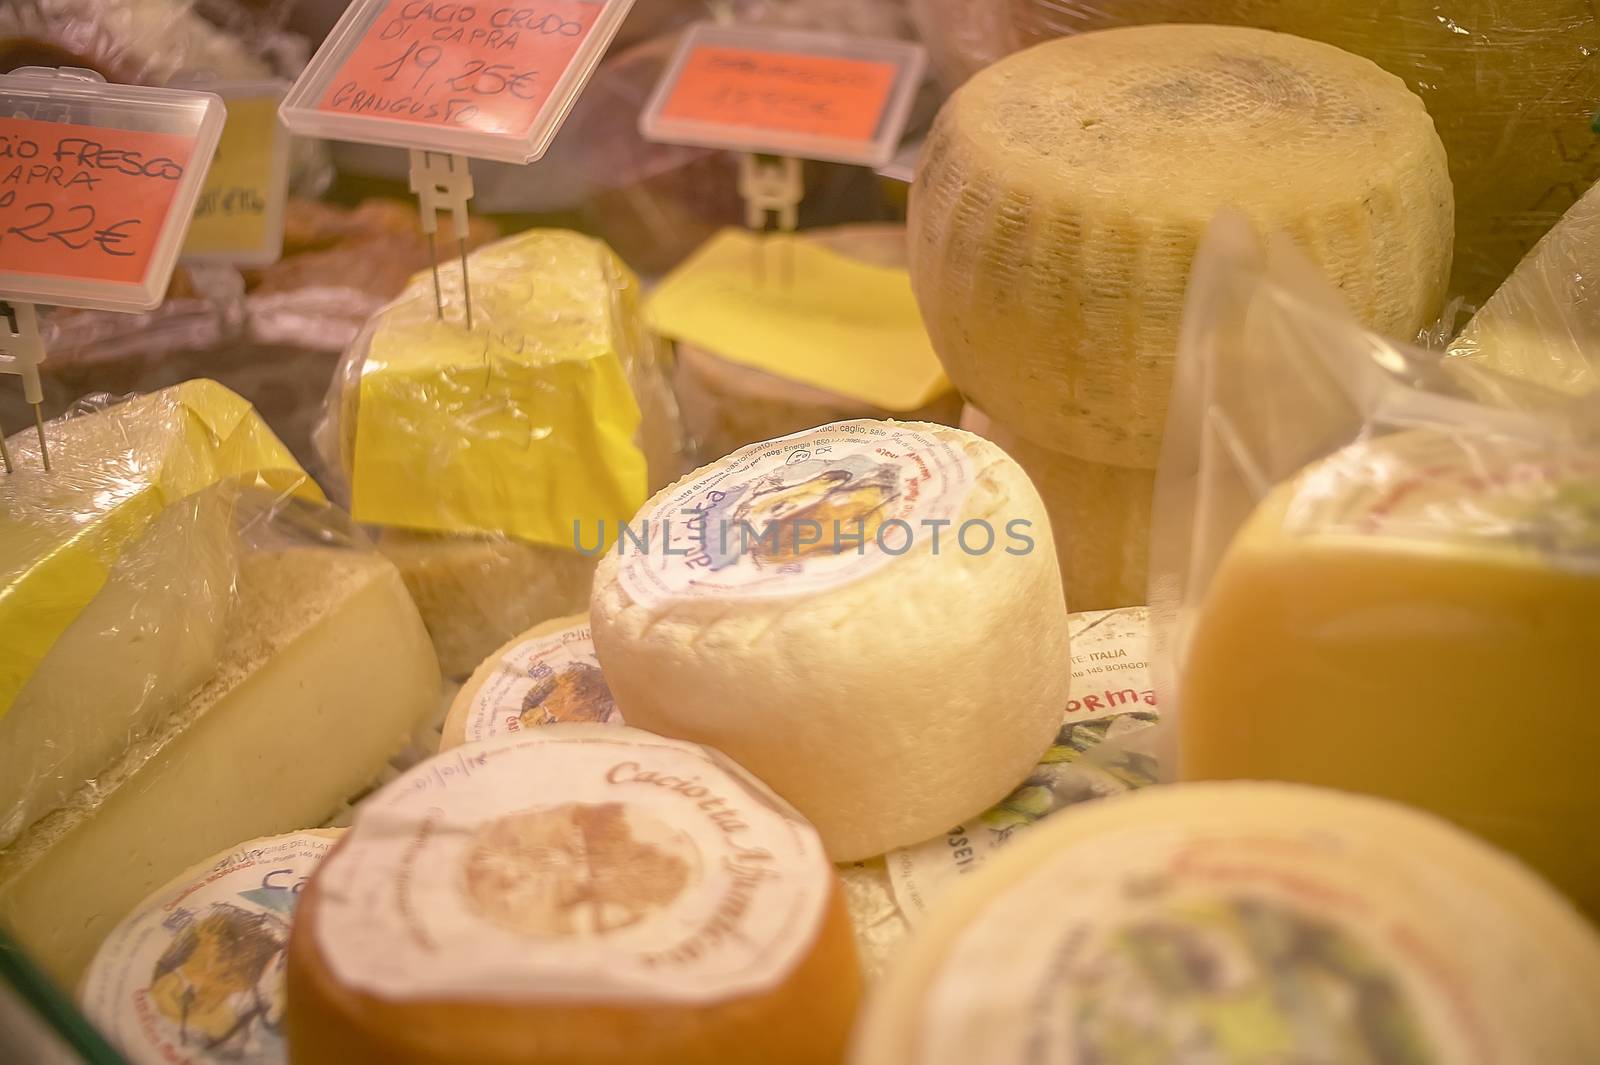 Many pieces of cheese ready to be sold at the supermarket